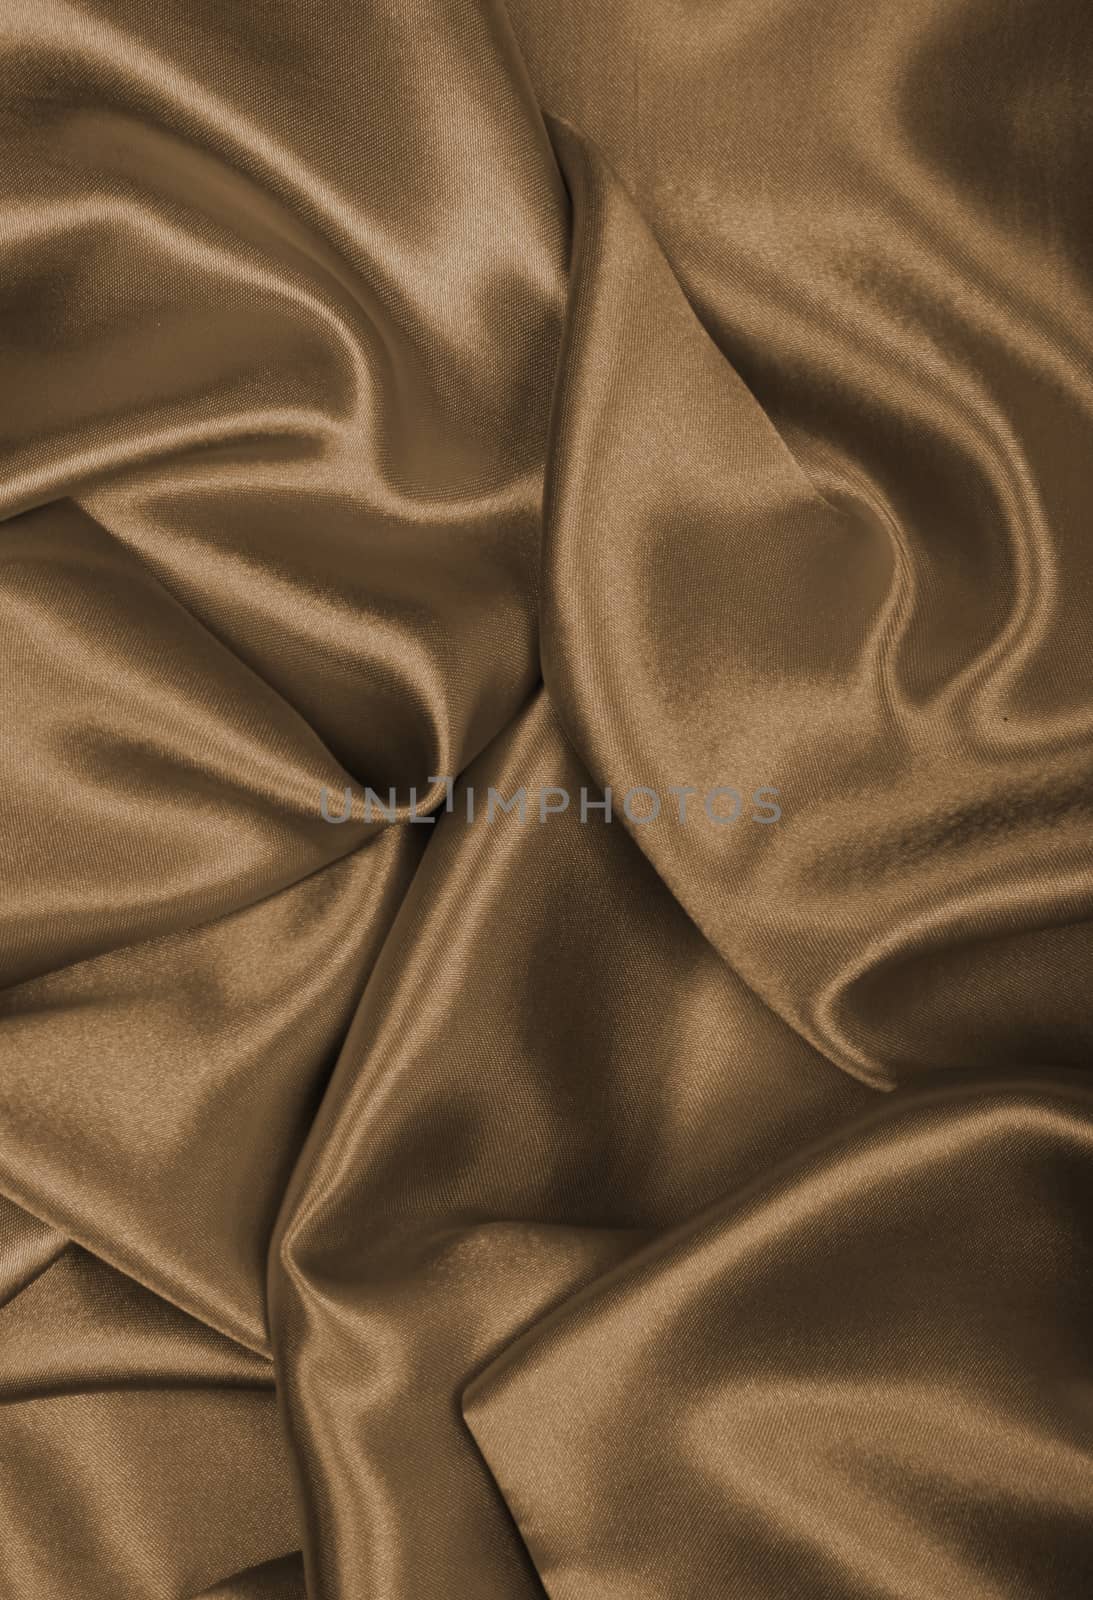 Smooth elegant golden silk or satin as background. In Sepia tone by oxanatravel